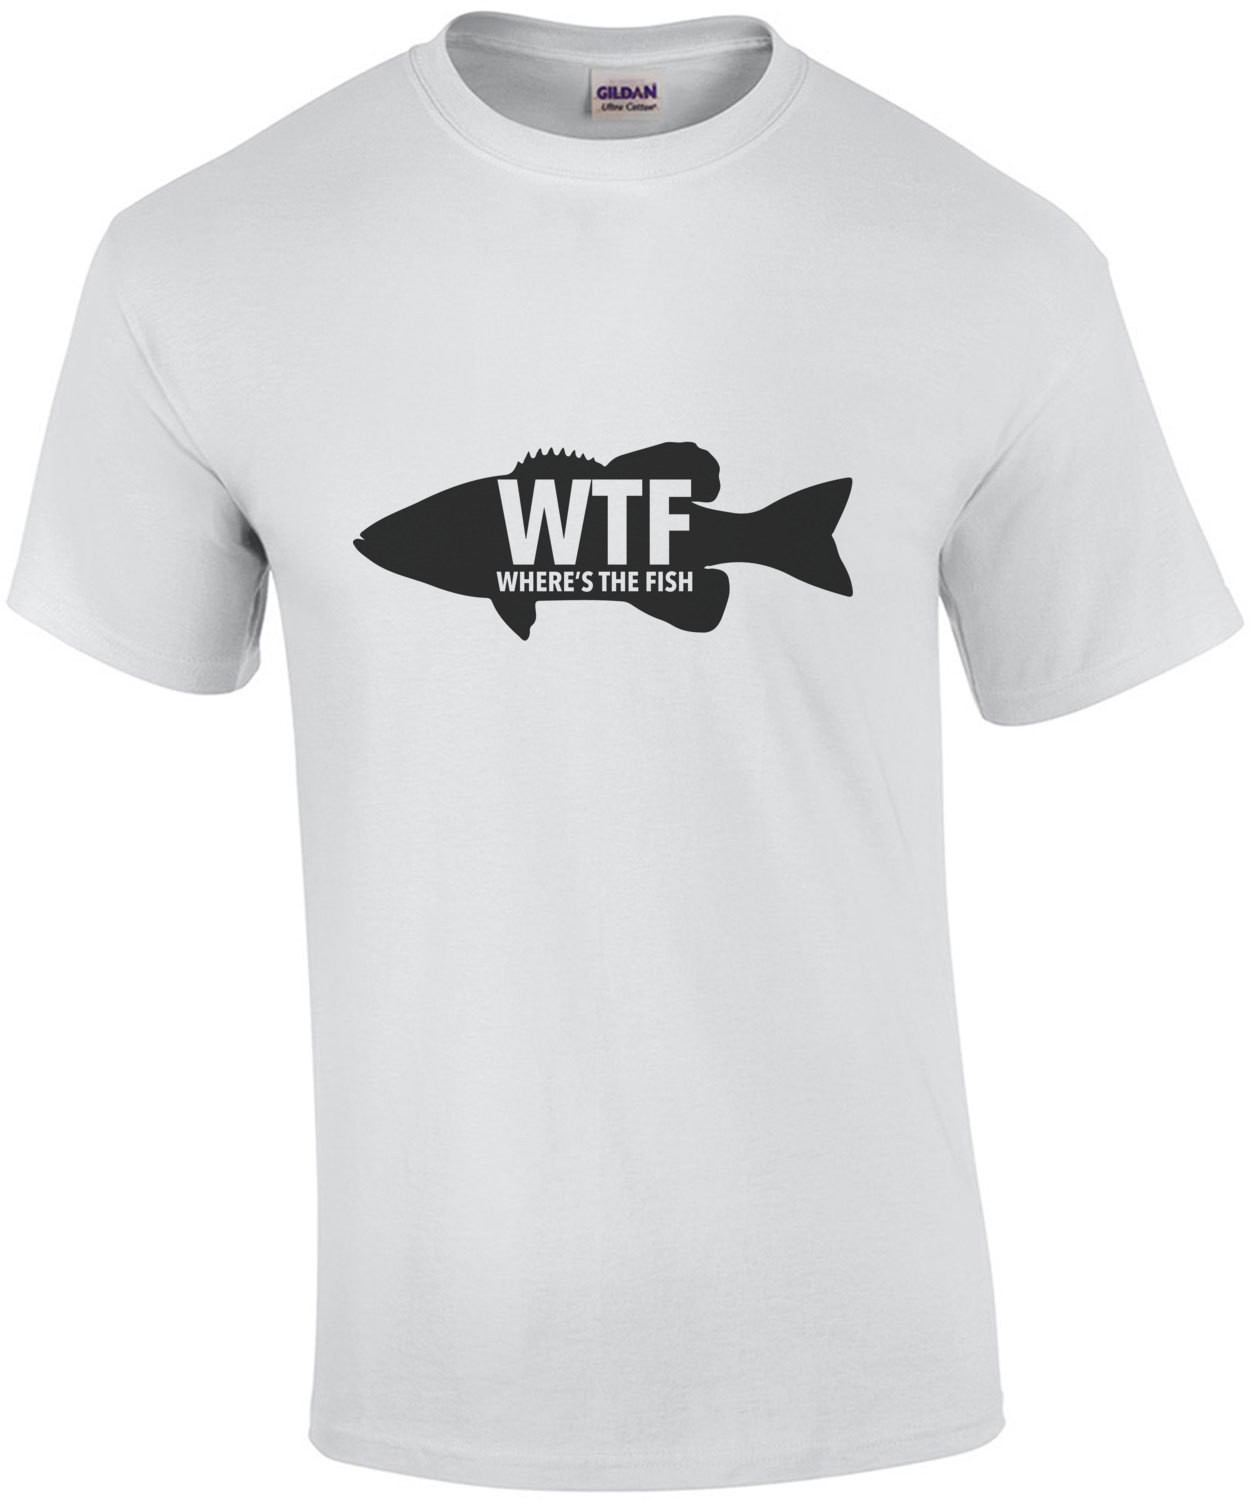 WTF - Where's the fish - funny fishing t-shirt